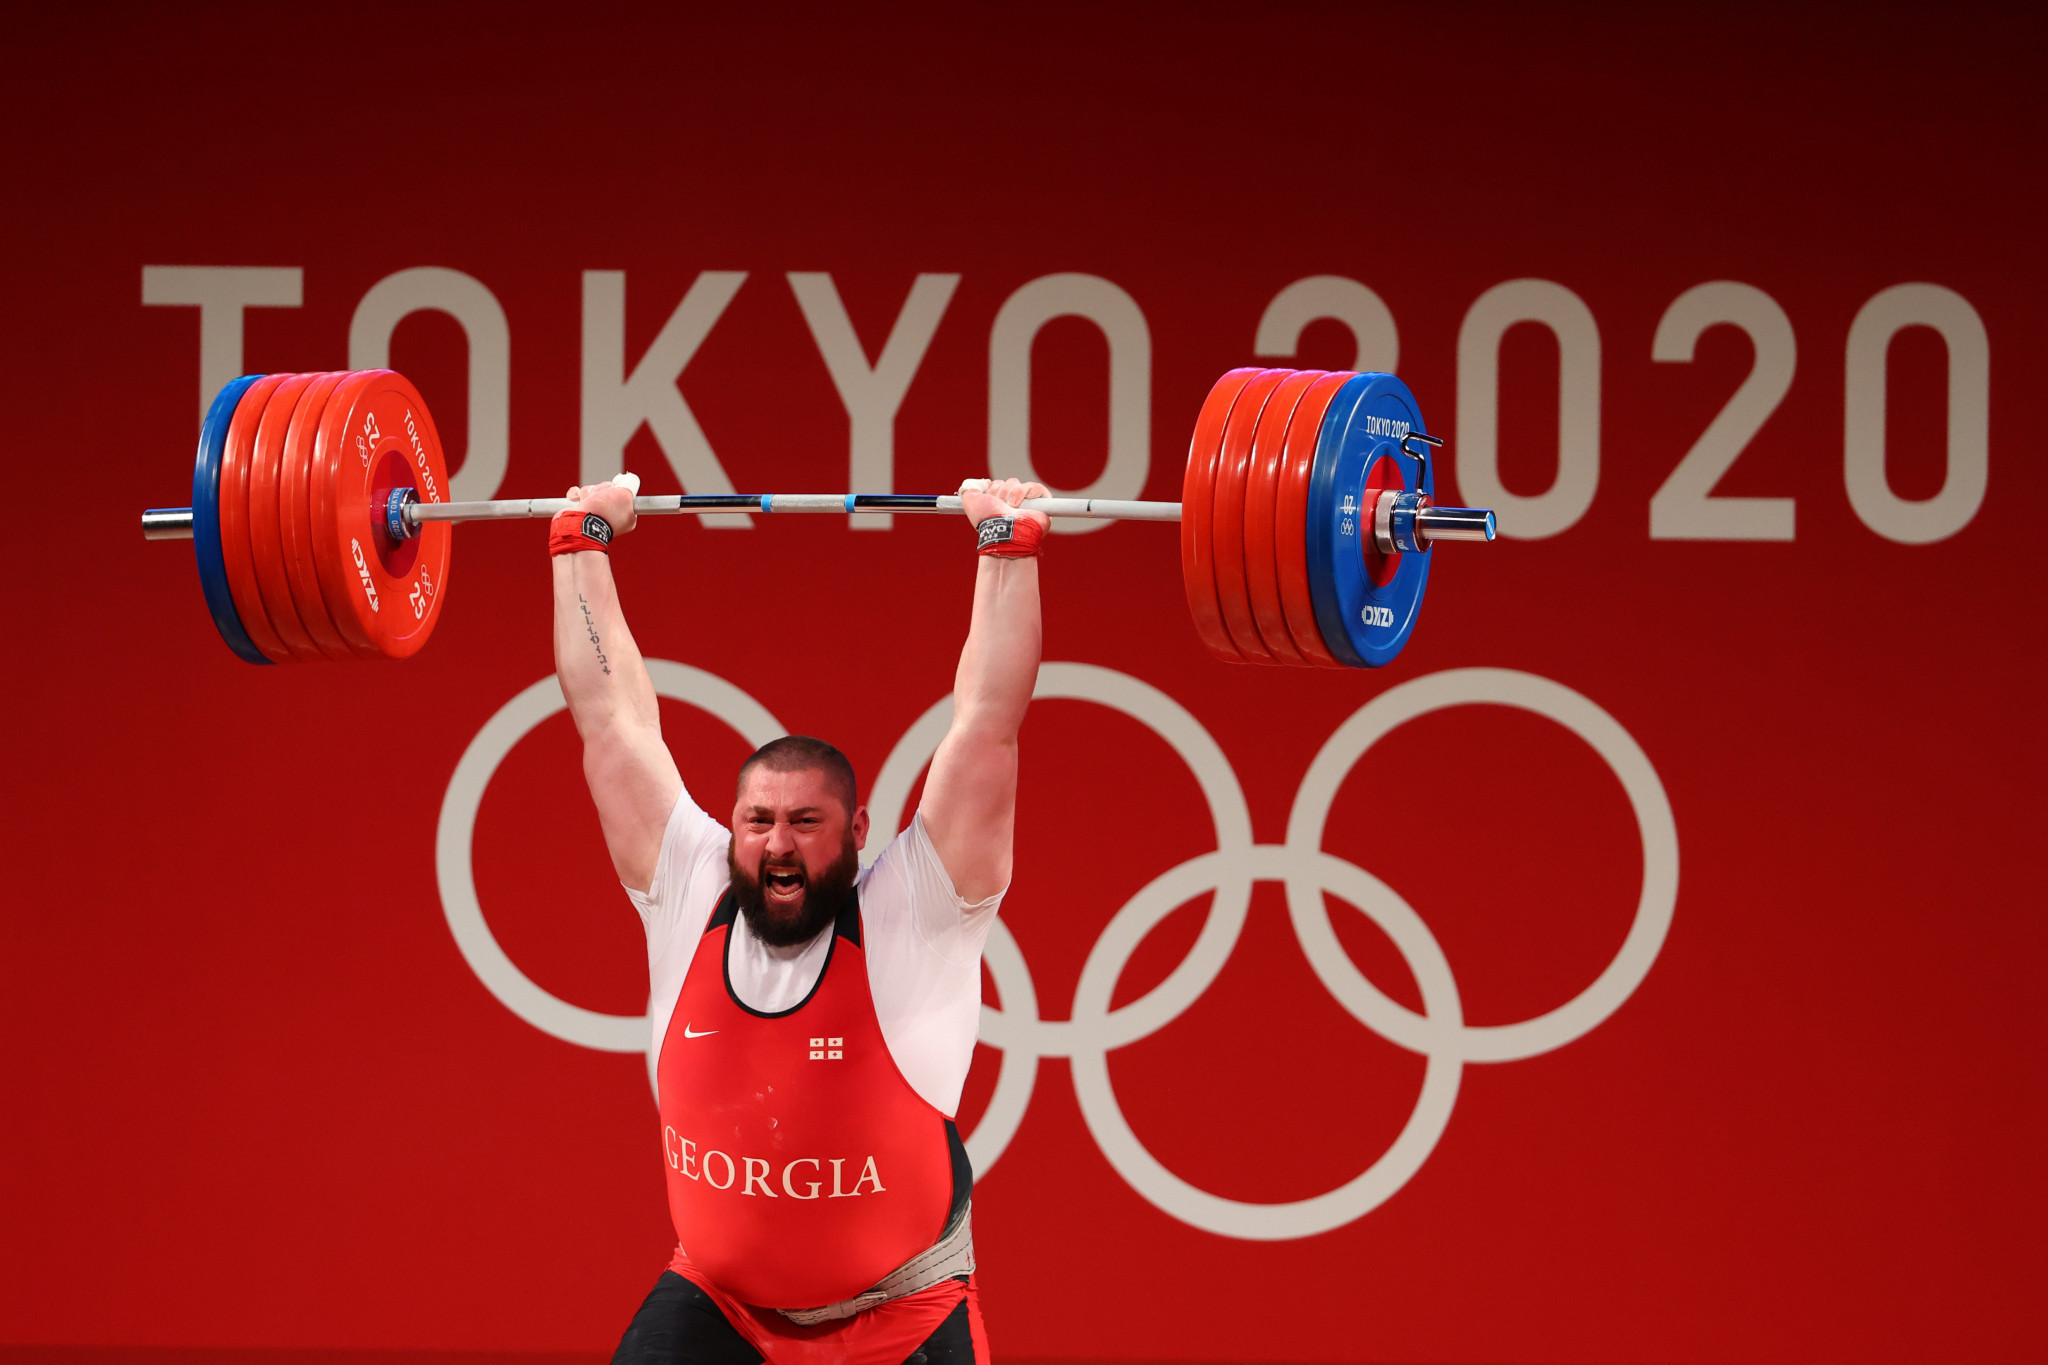 Georgia's Lasha Talakhadze won what could be the last Olympic weightlifting gold medal, with the sport's Paris 2024 place in doubt and the IWF's upcoming elections seen as key to weightlifting's Olympic future ©Getty Images